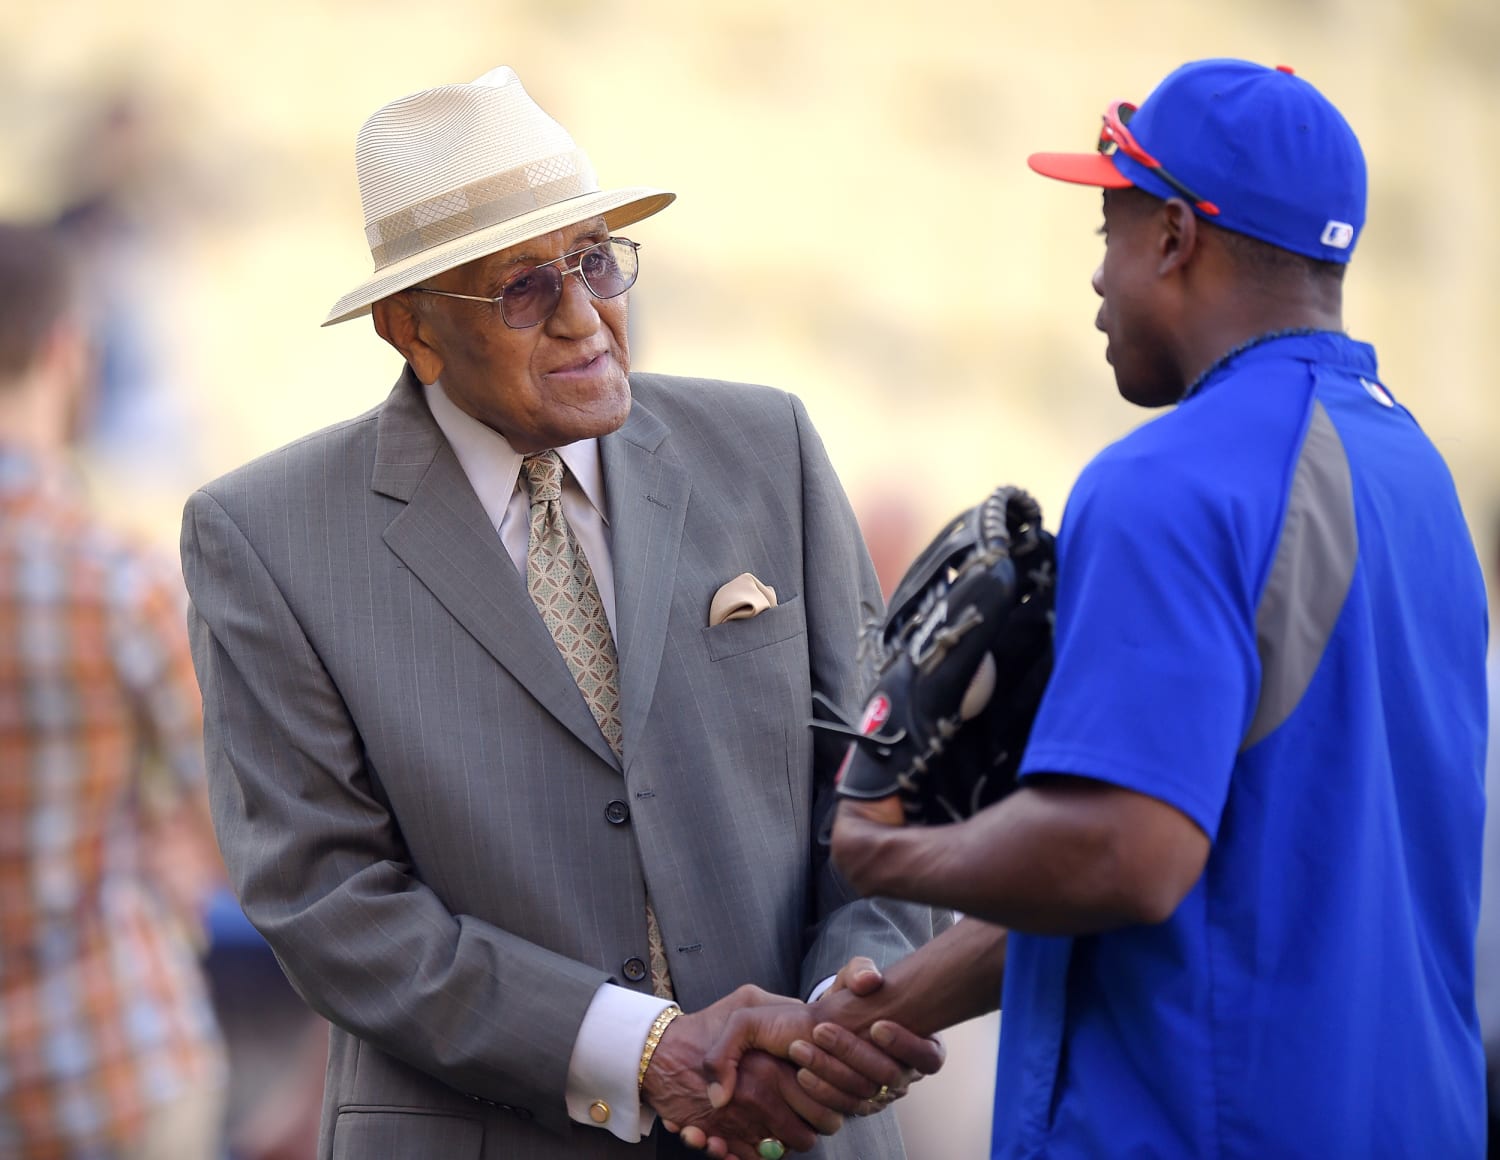 Dodgers pitcher, Madison native Don Newcombe has died